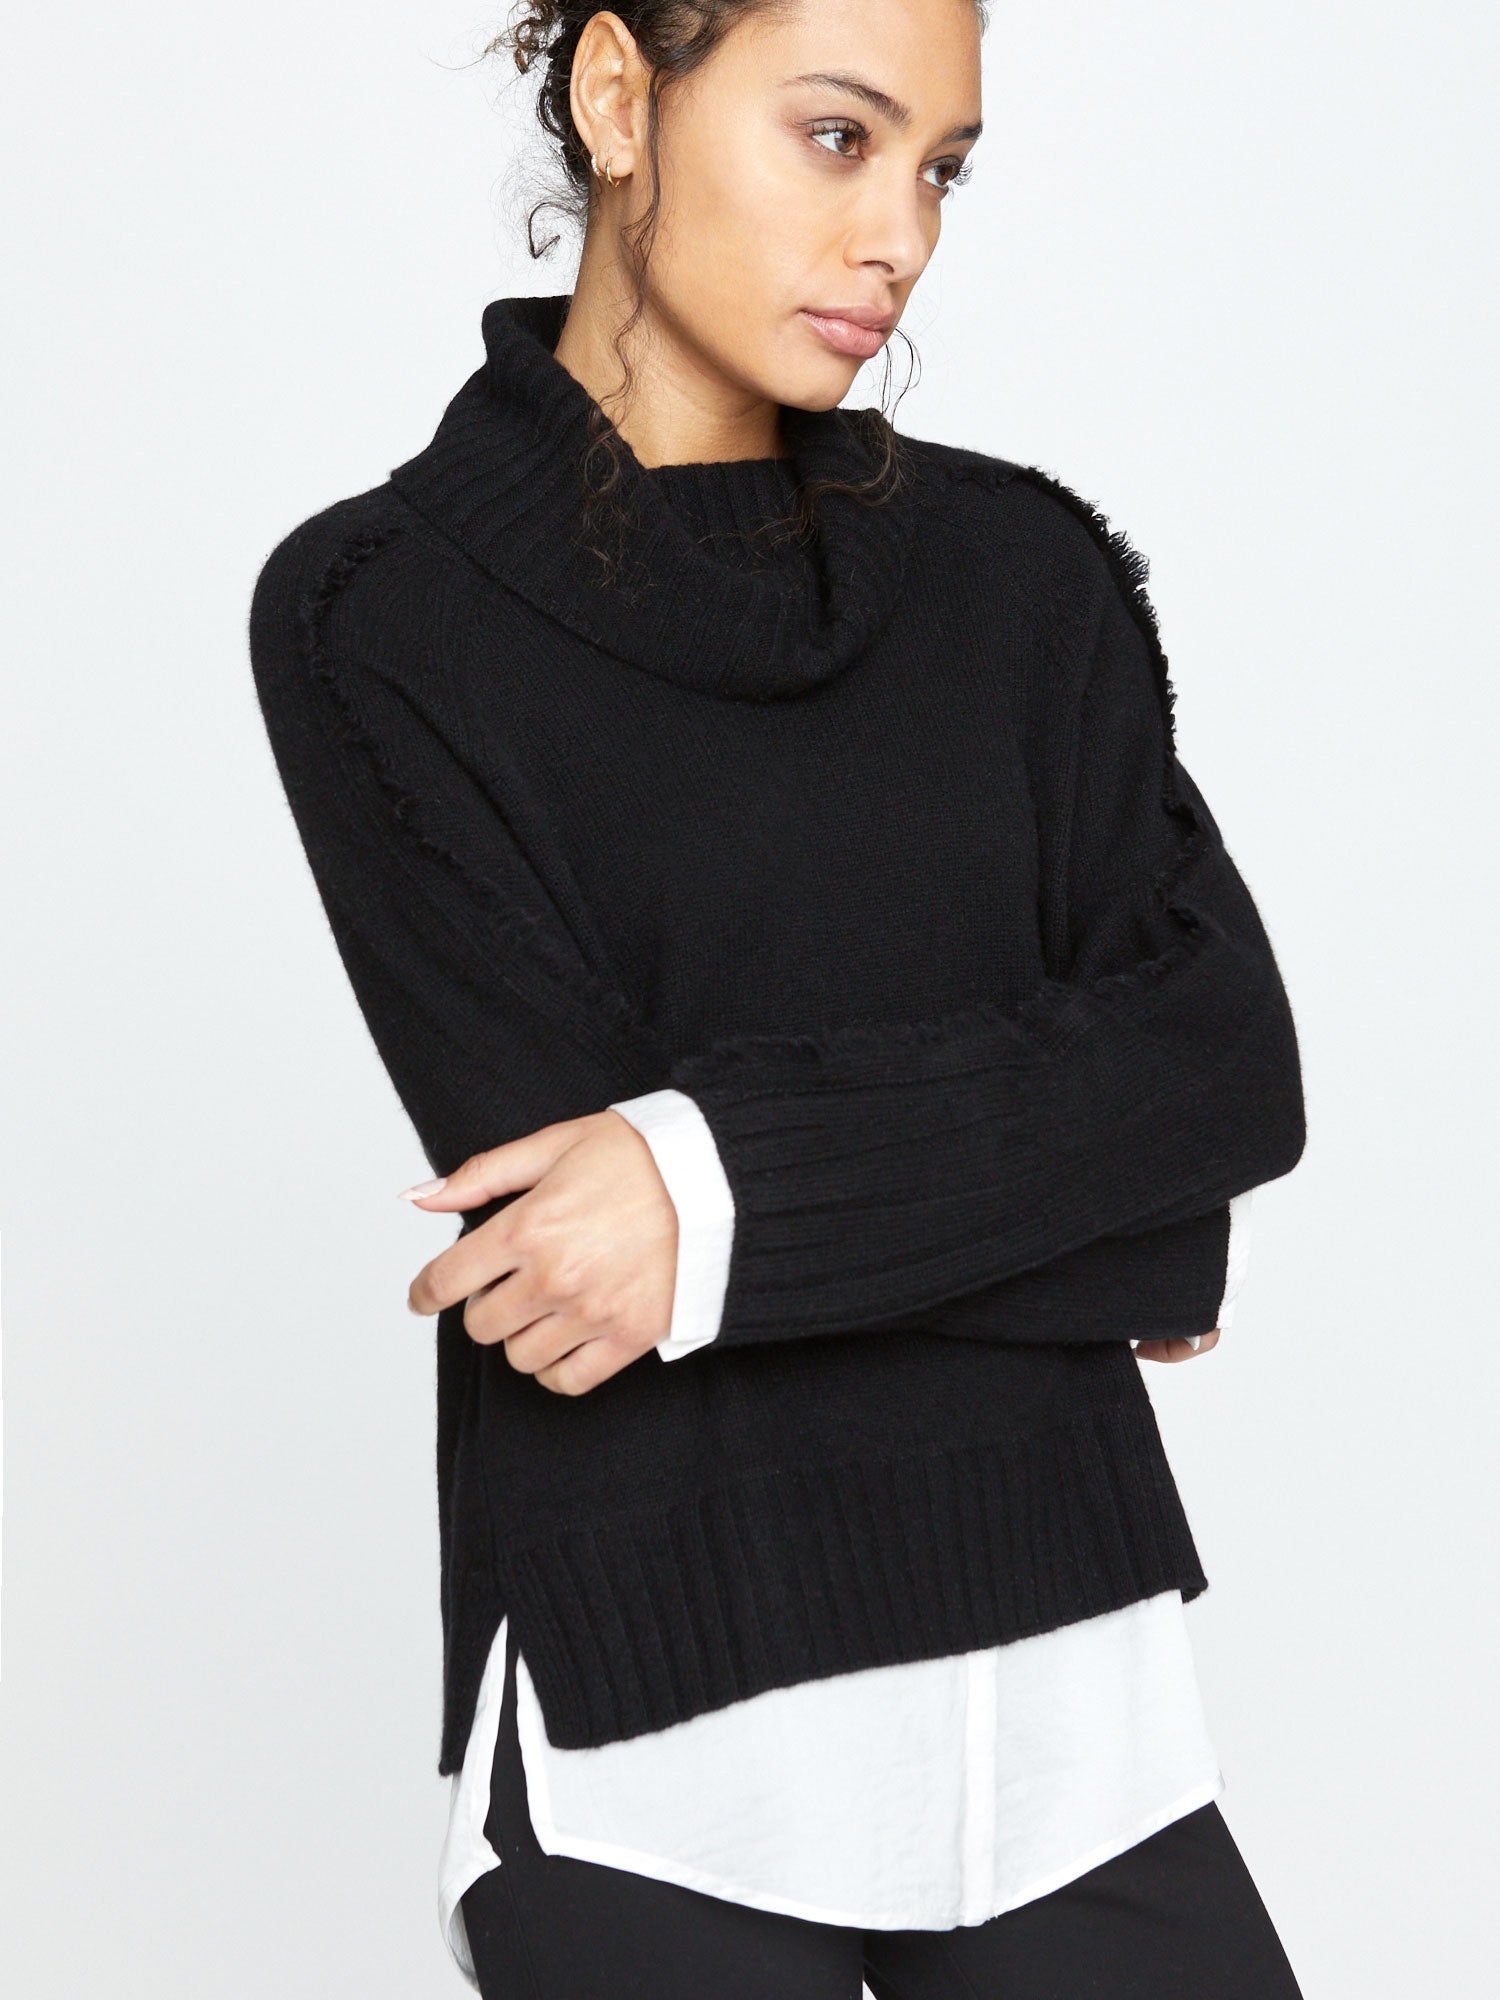 Jolie black layered turtleneck sweater front view 3